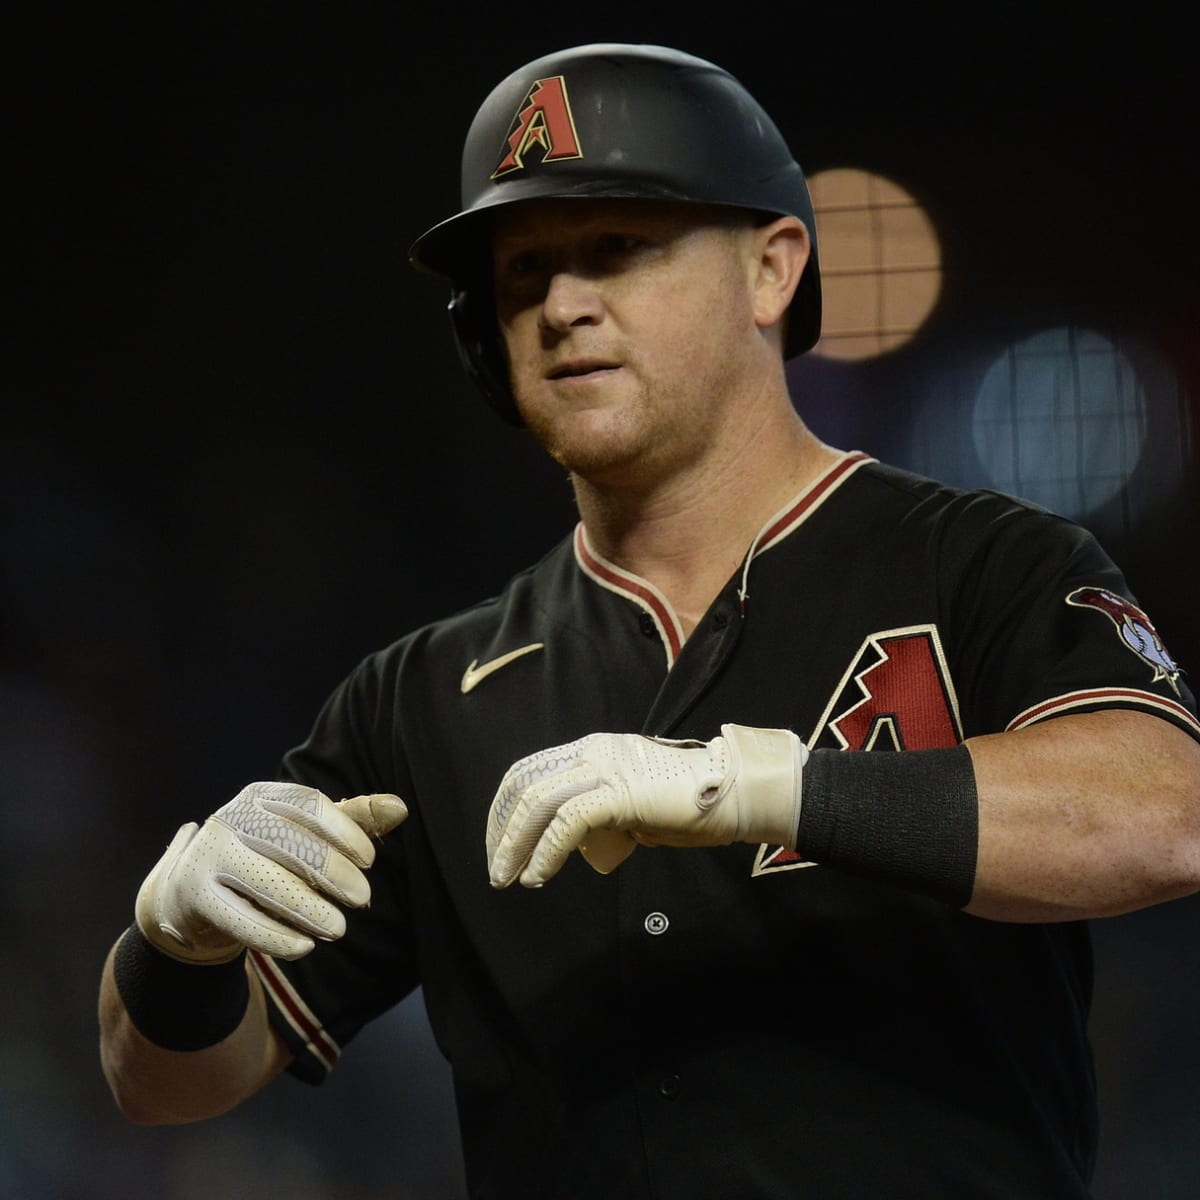 Texas Rangers - OFFICIAL: We've signed outfielder Kole Calhoun to